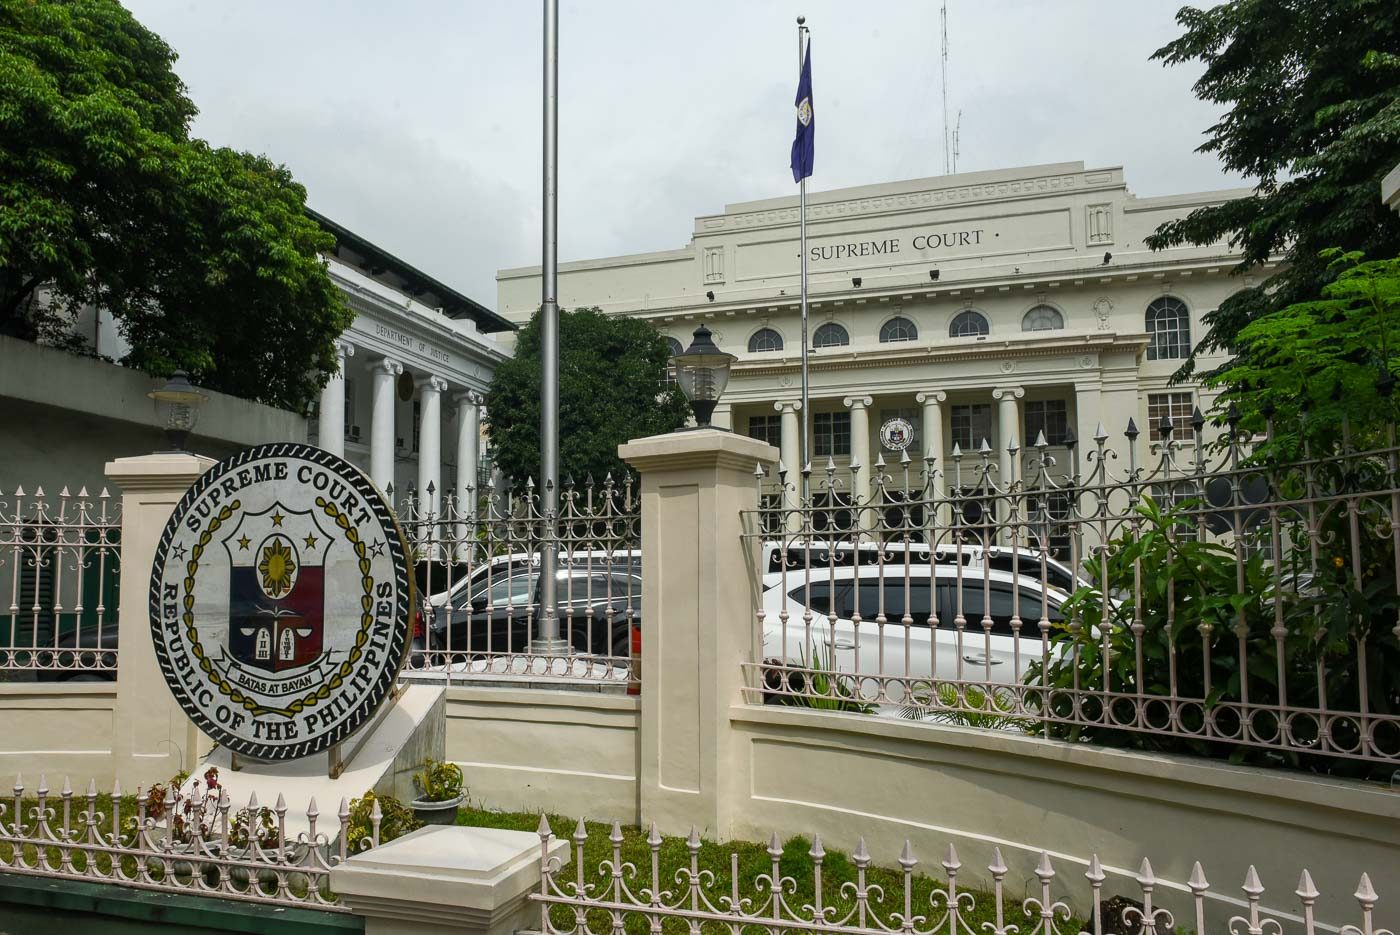 Gov’t officials can correct SALN mistakes, omissions, says Supreme Court